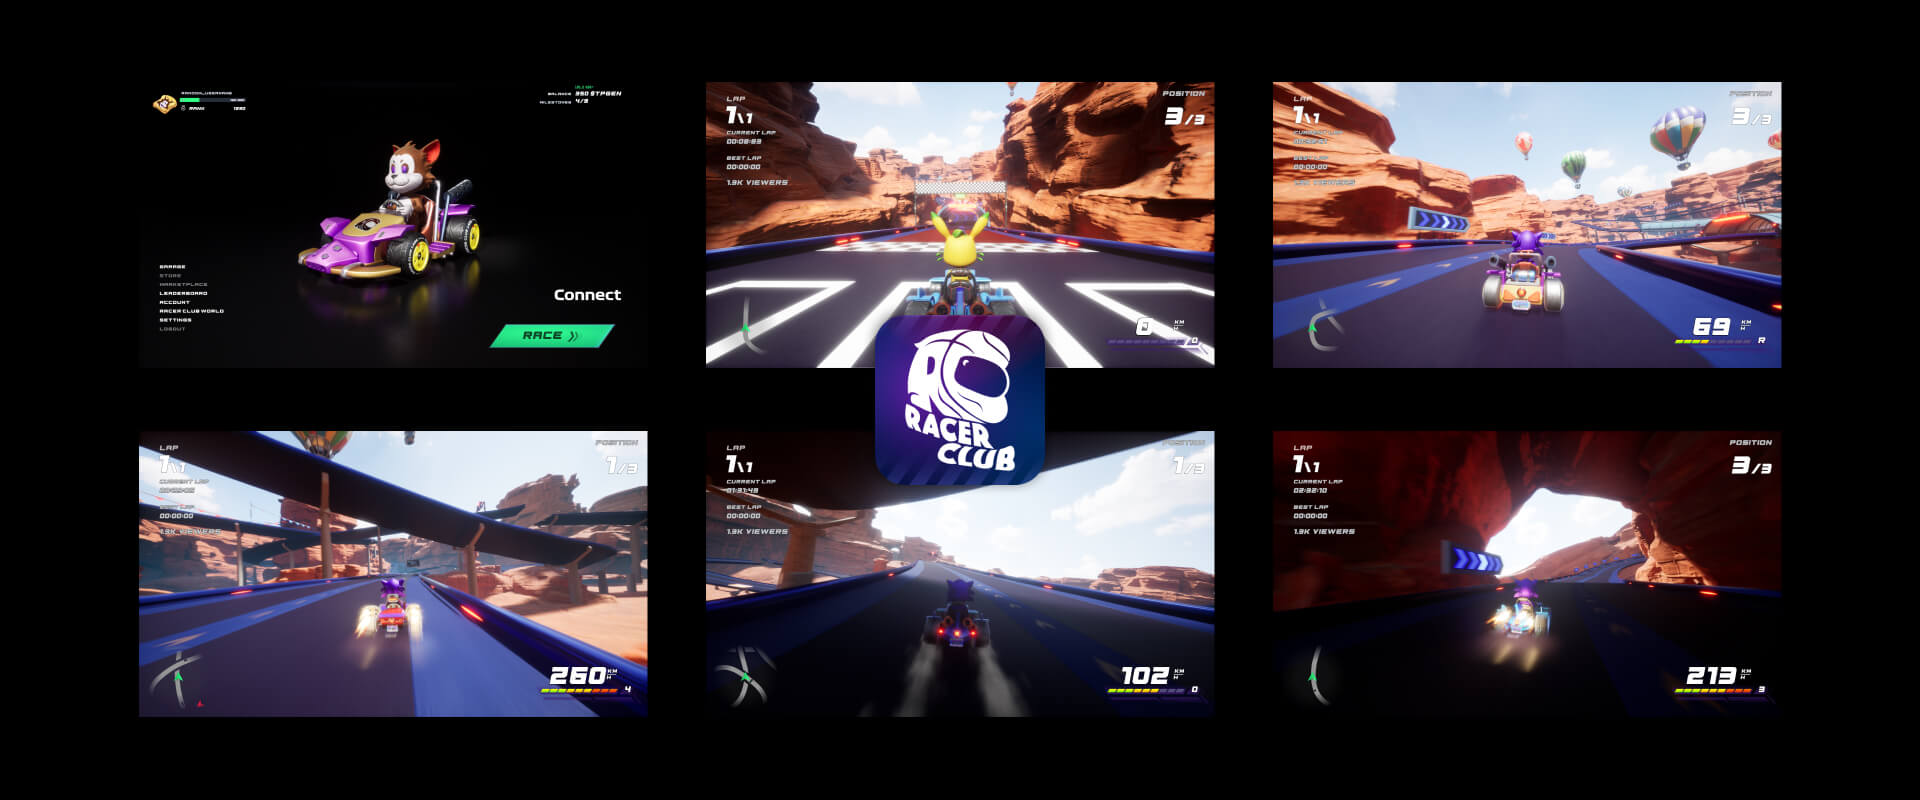 Racer Club all aspects of the game development